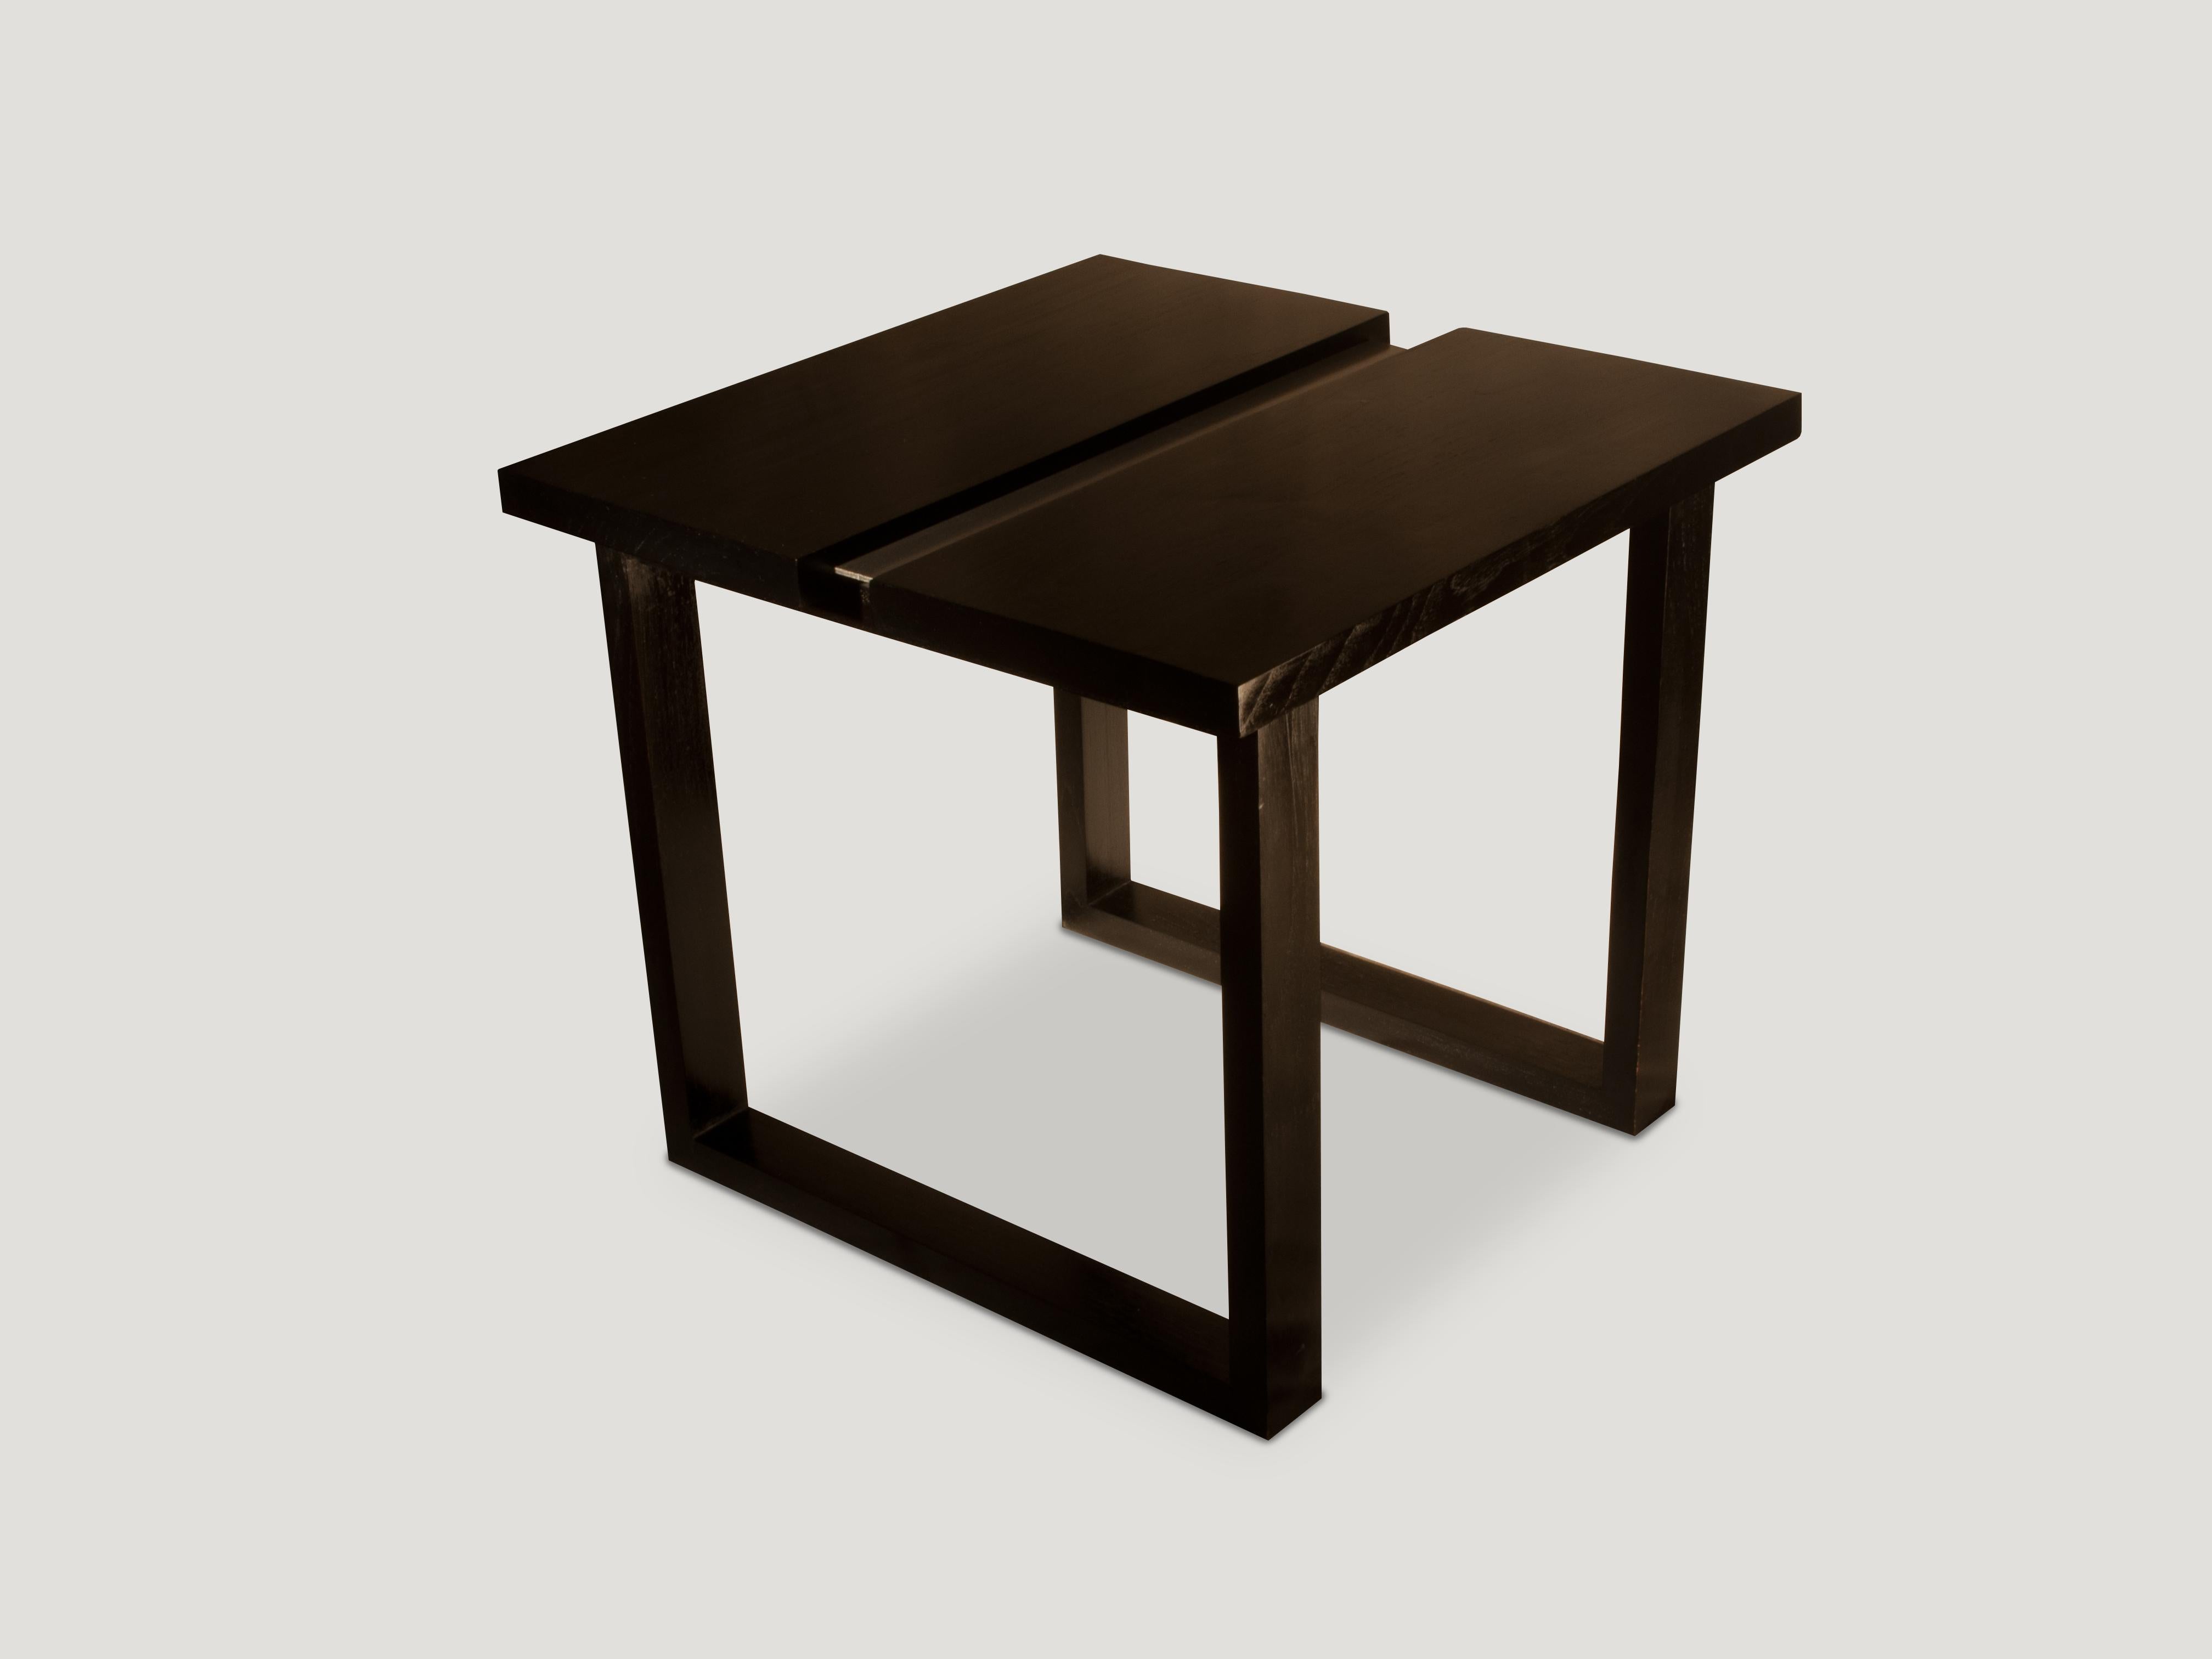 Sleek modern lines on this Minimalist steel and wood side table. We have added an espresso finish to the reclaimed teak wood with a stainless steel center.

Andrianna Shamaris. The Leader In Modern Organic Design.